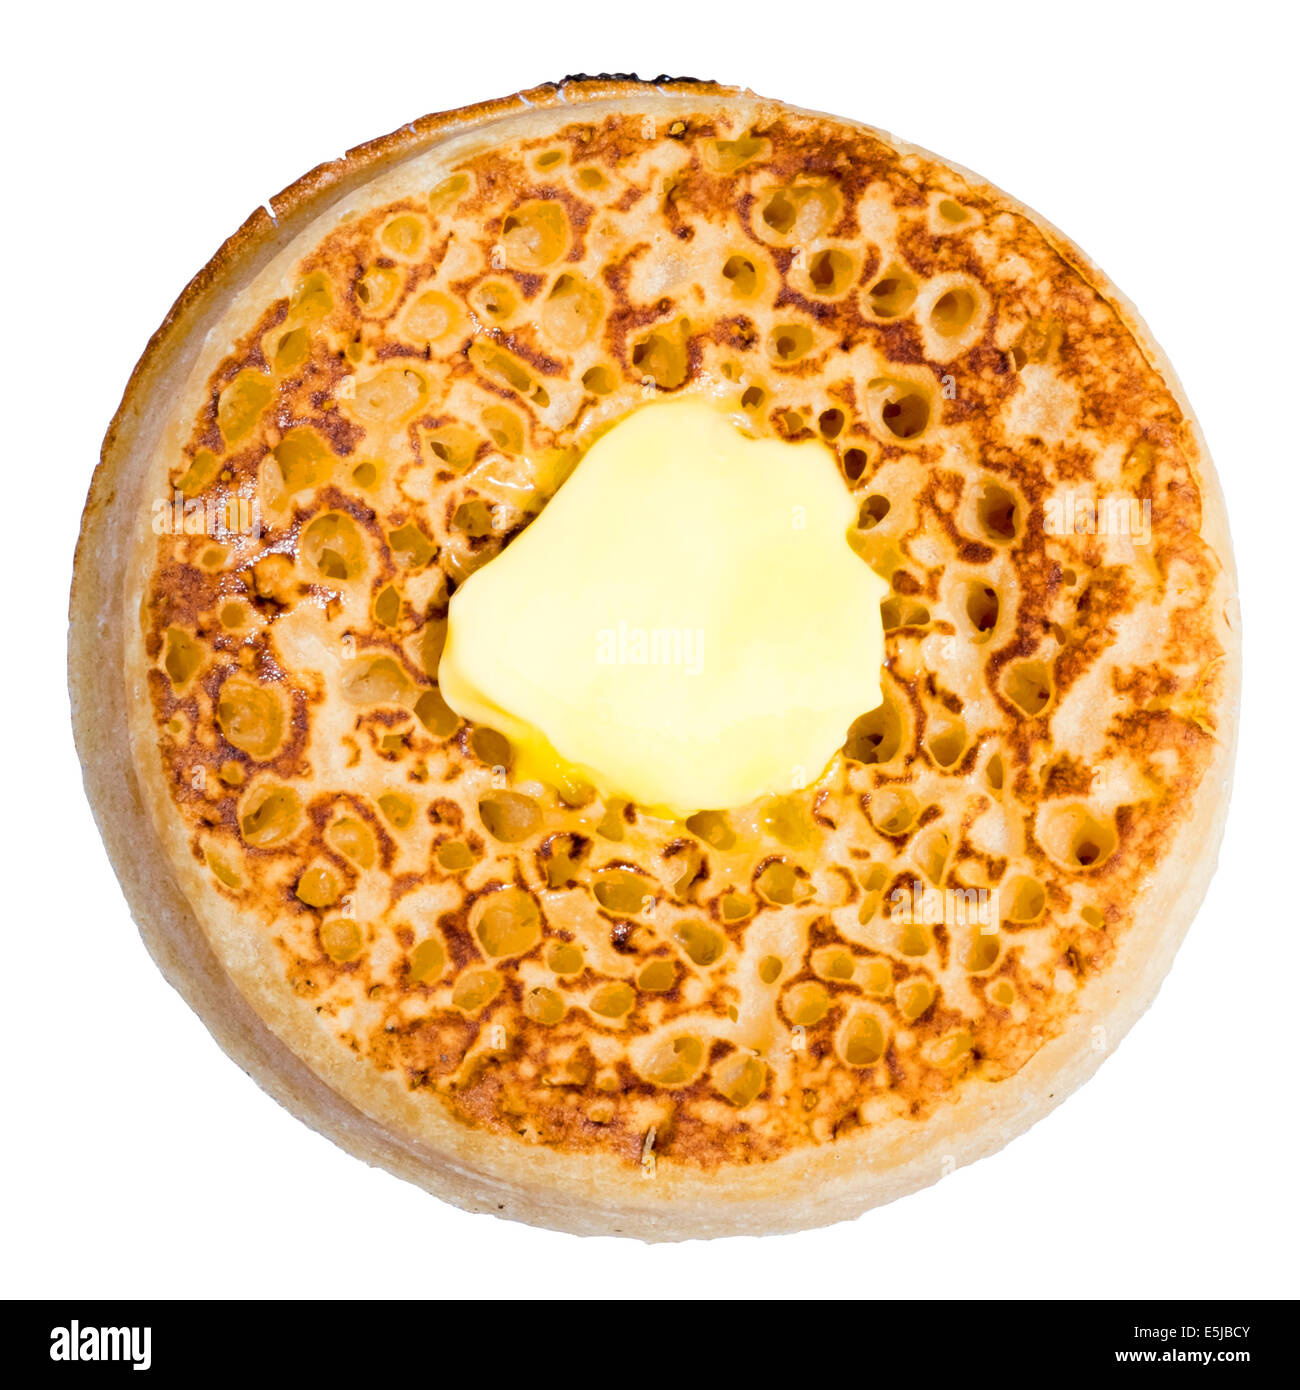 Toasted crumpet cut out or isolated against a white background. Stock Photo